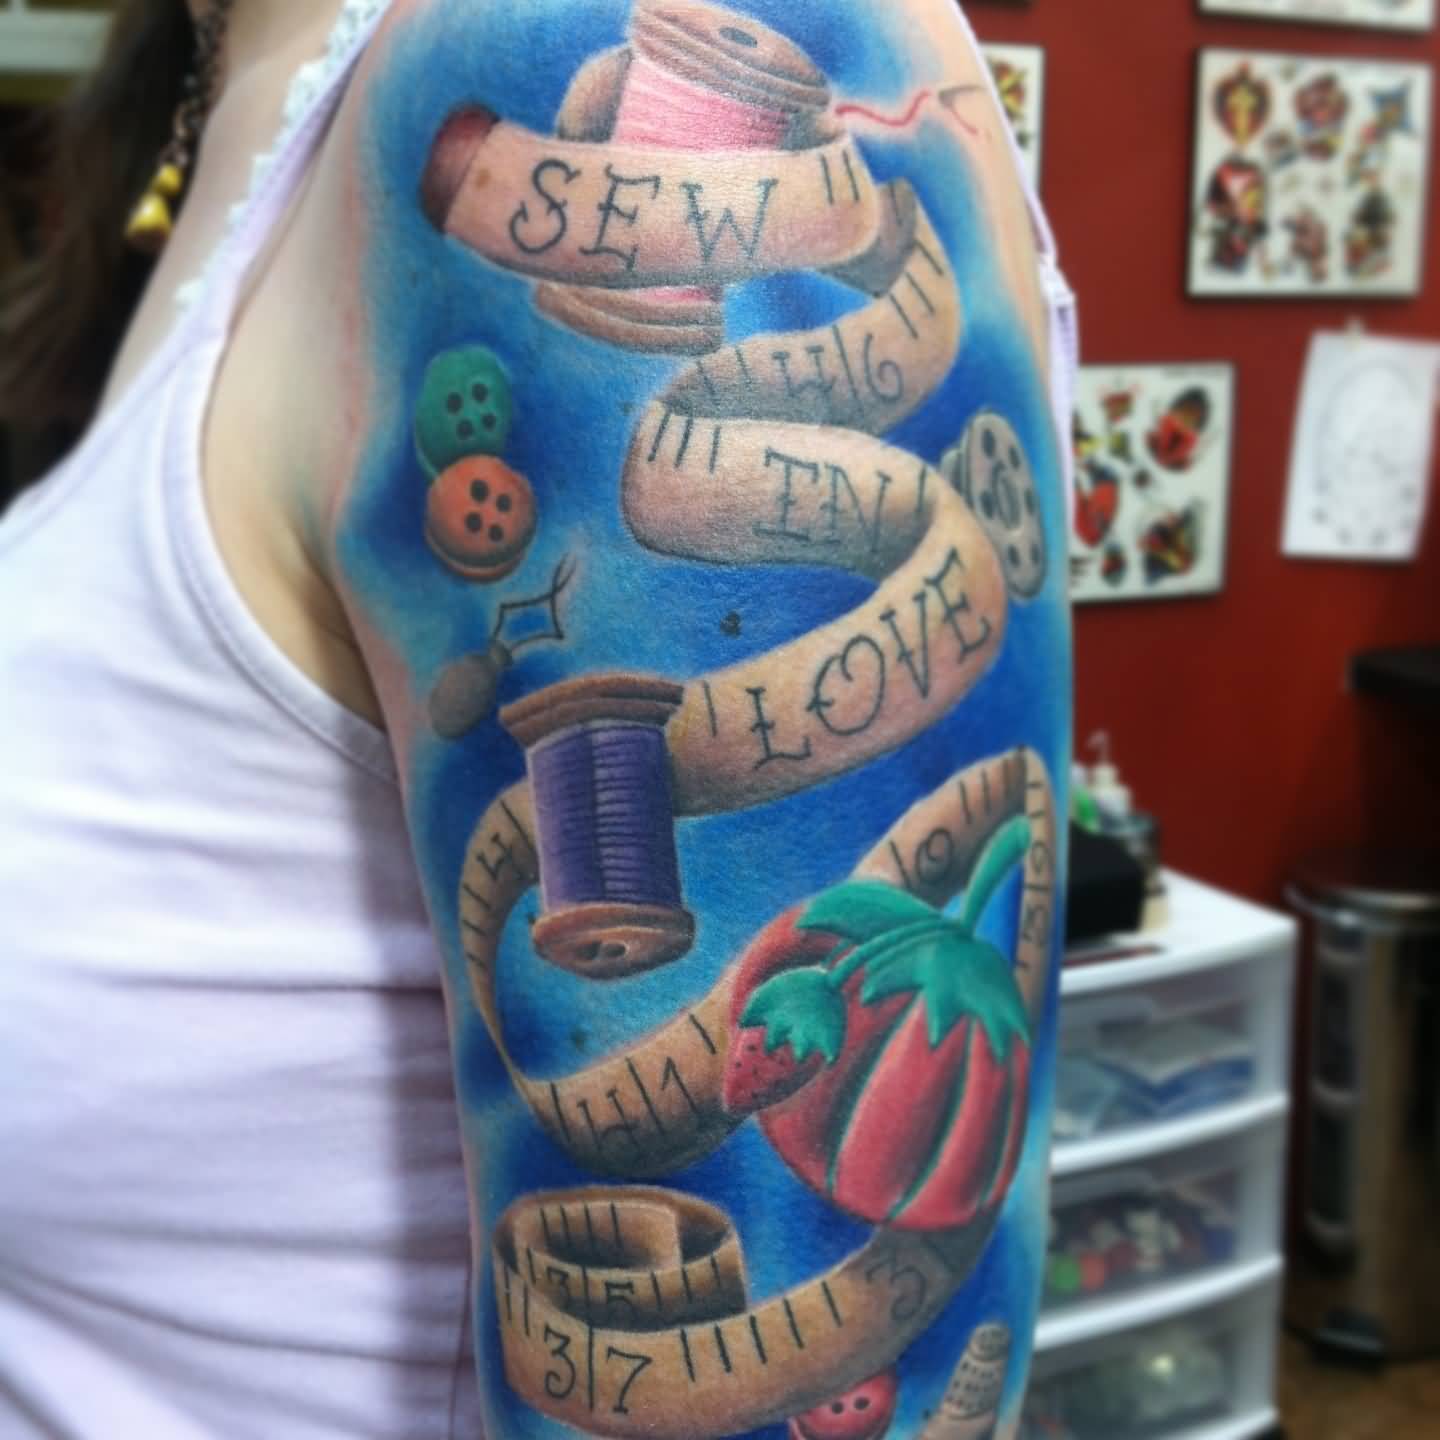 Awesome Sewing Theme Tattoo On Left Half Sleeve By Stowell